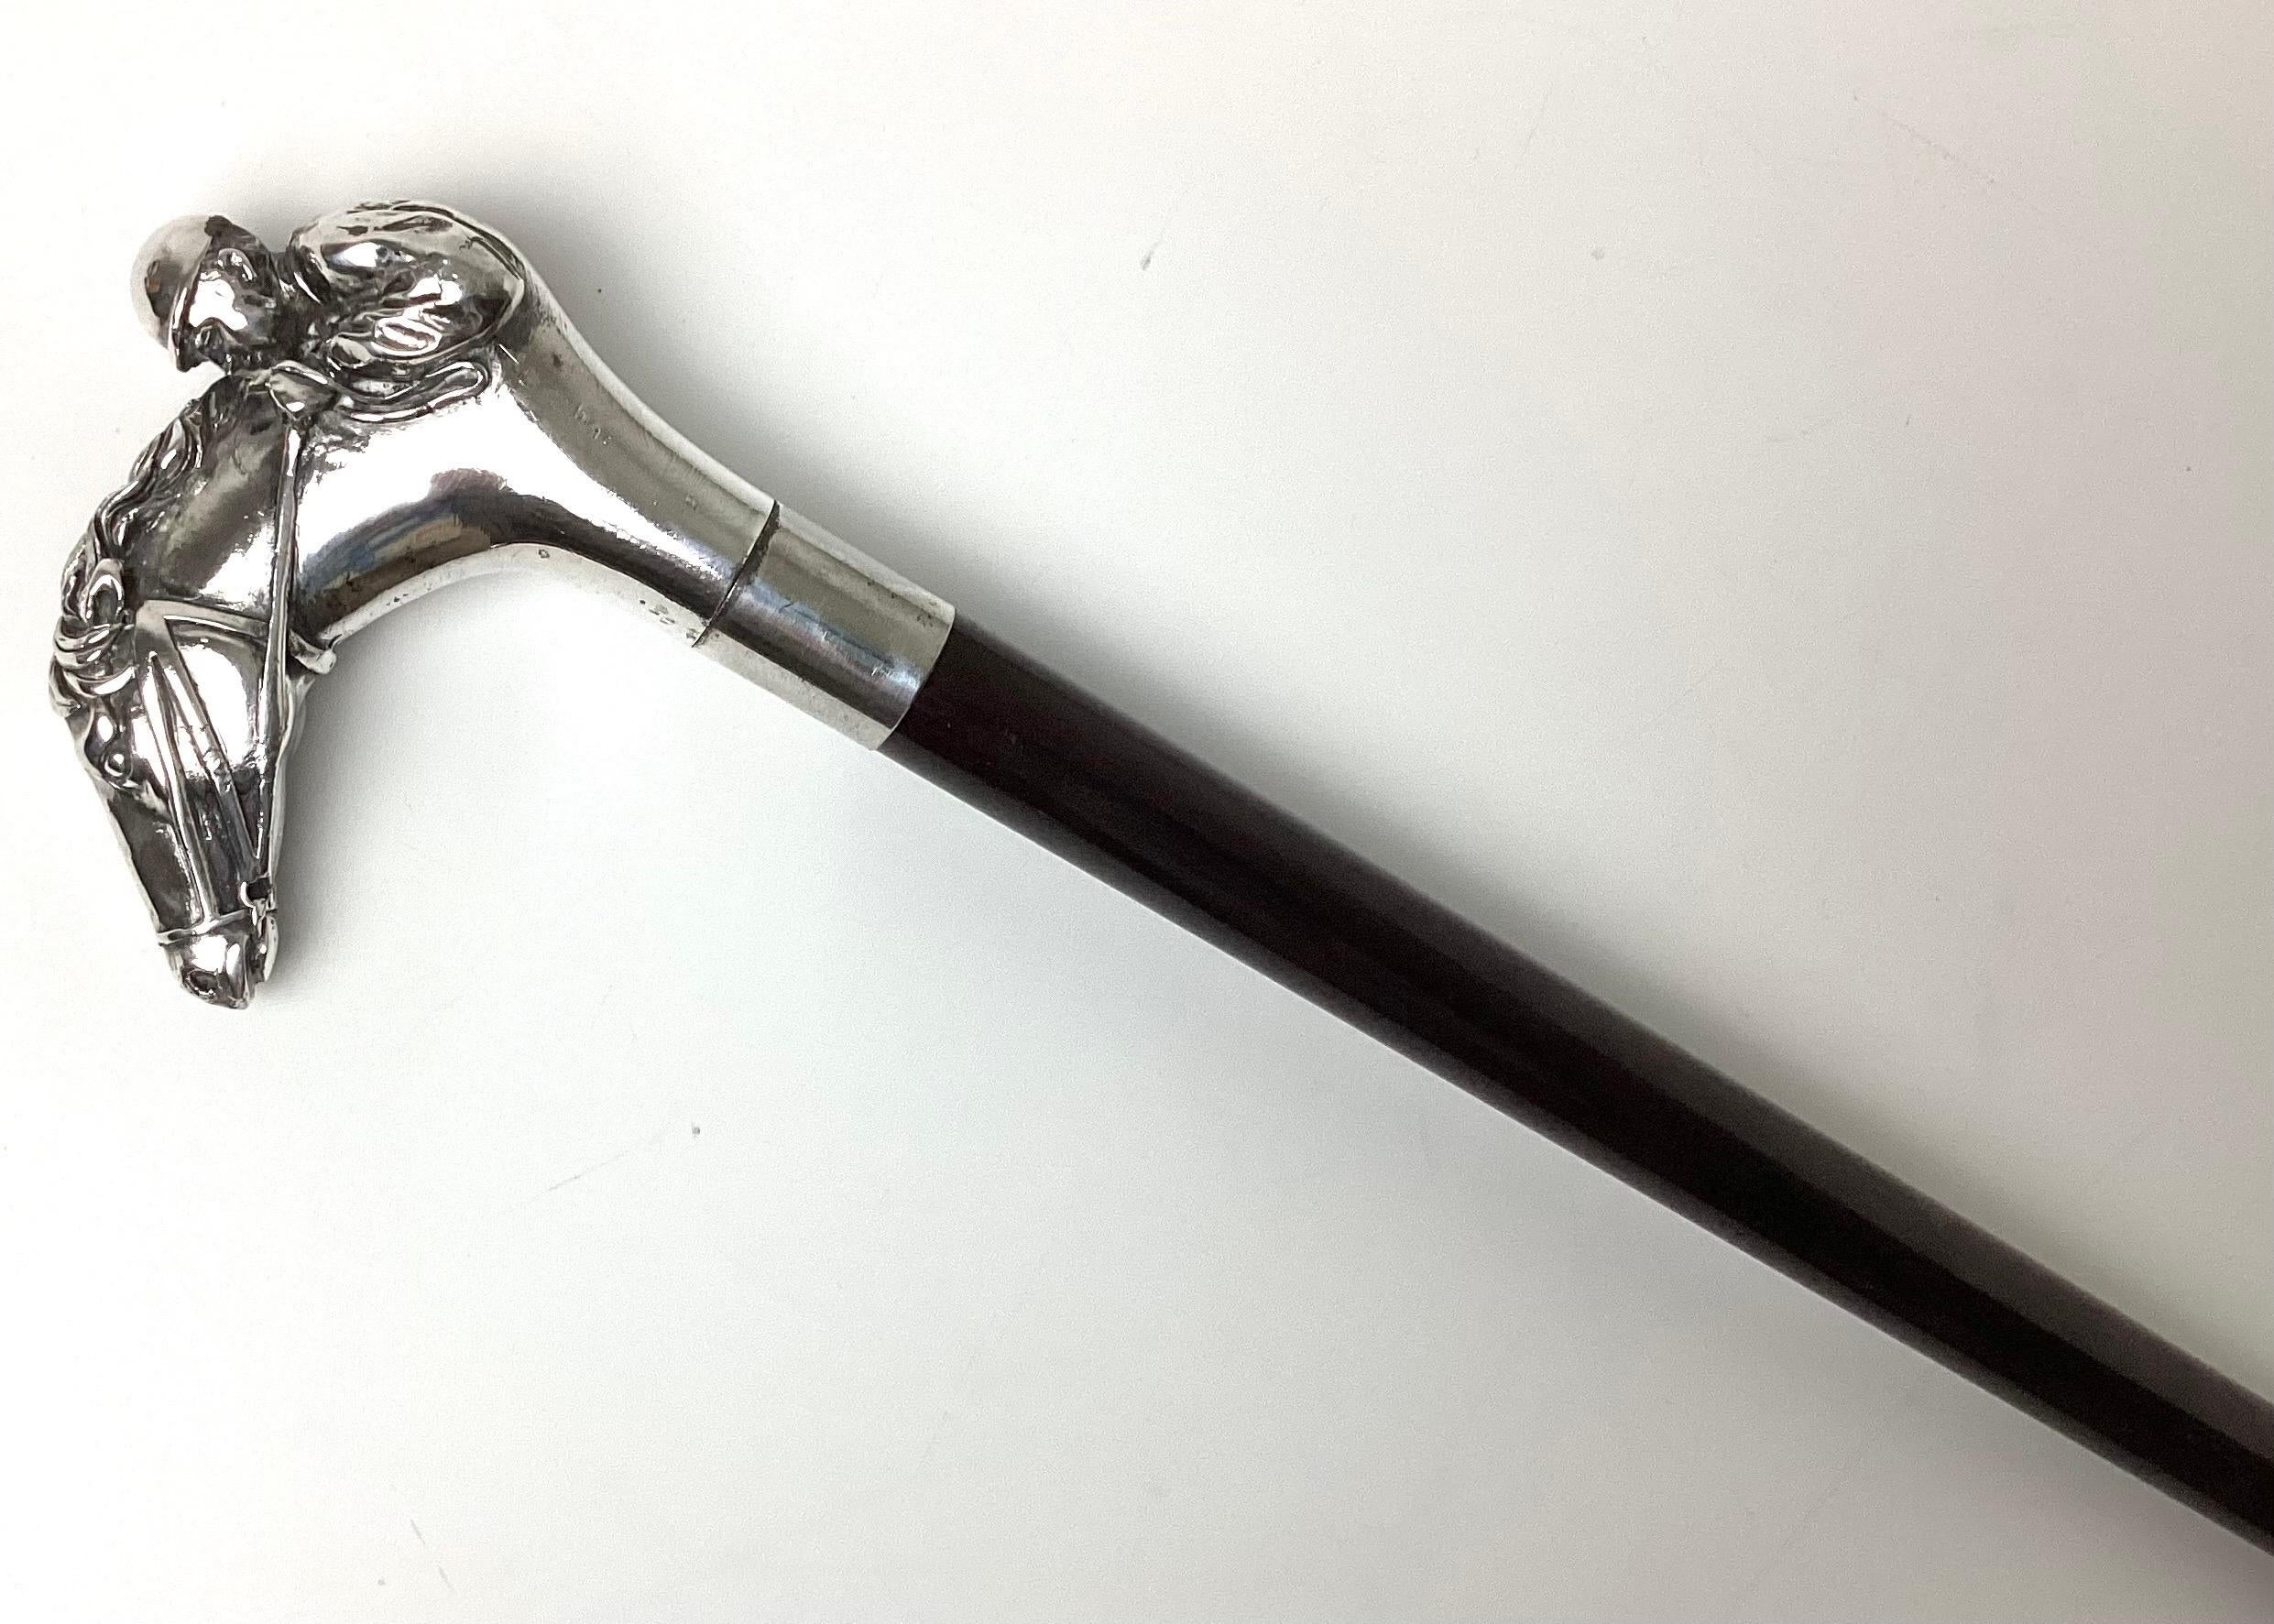 Sterling Silver Horse & Jockey Walking Cane Stick. Marked FP 925 0n side. Stick looks like rosewood but could be mahogany. Brass tip. Some minor wear from use.